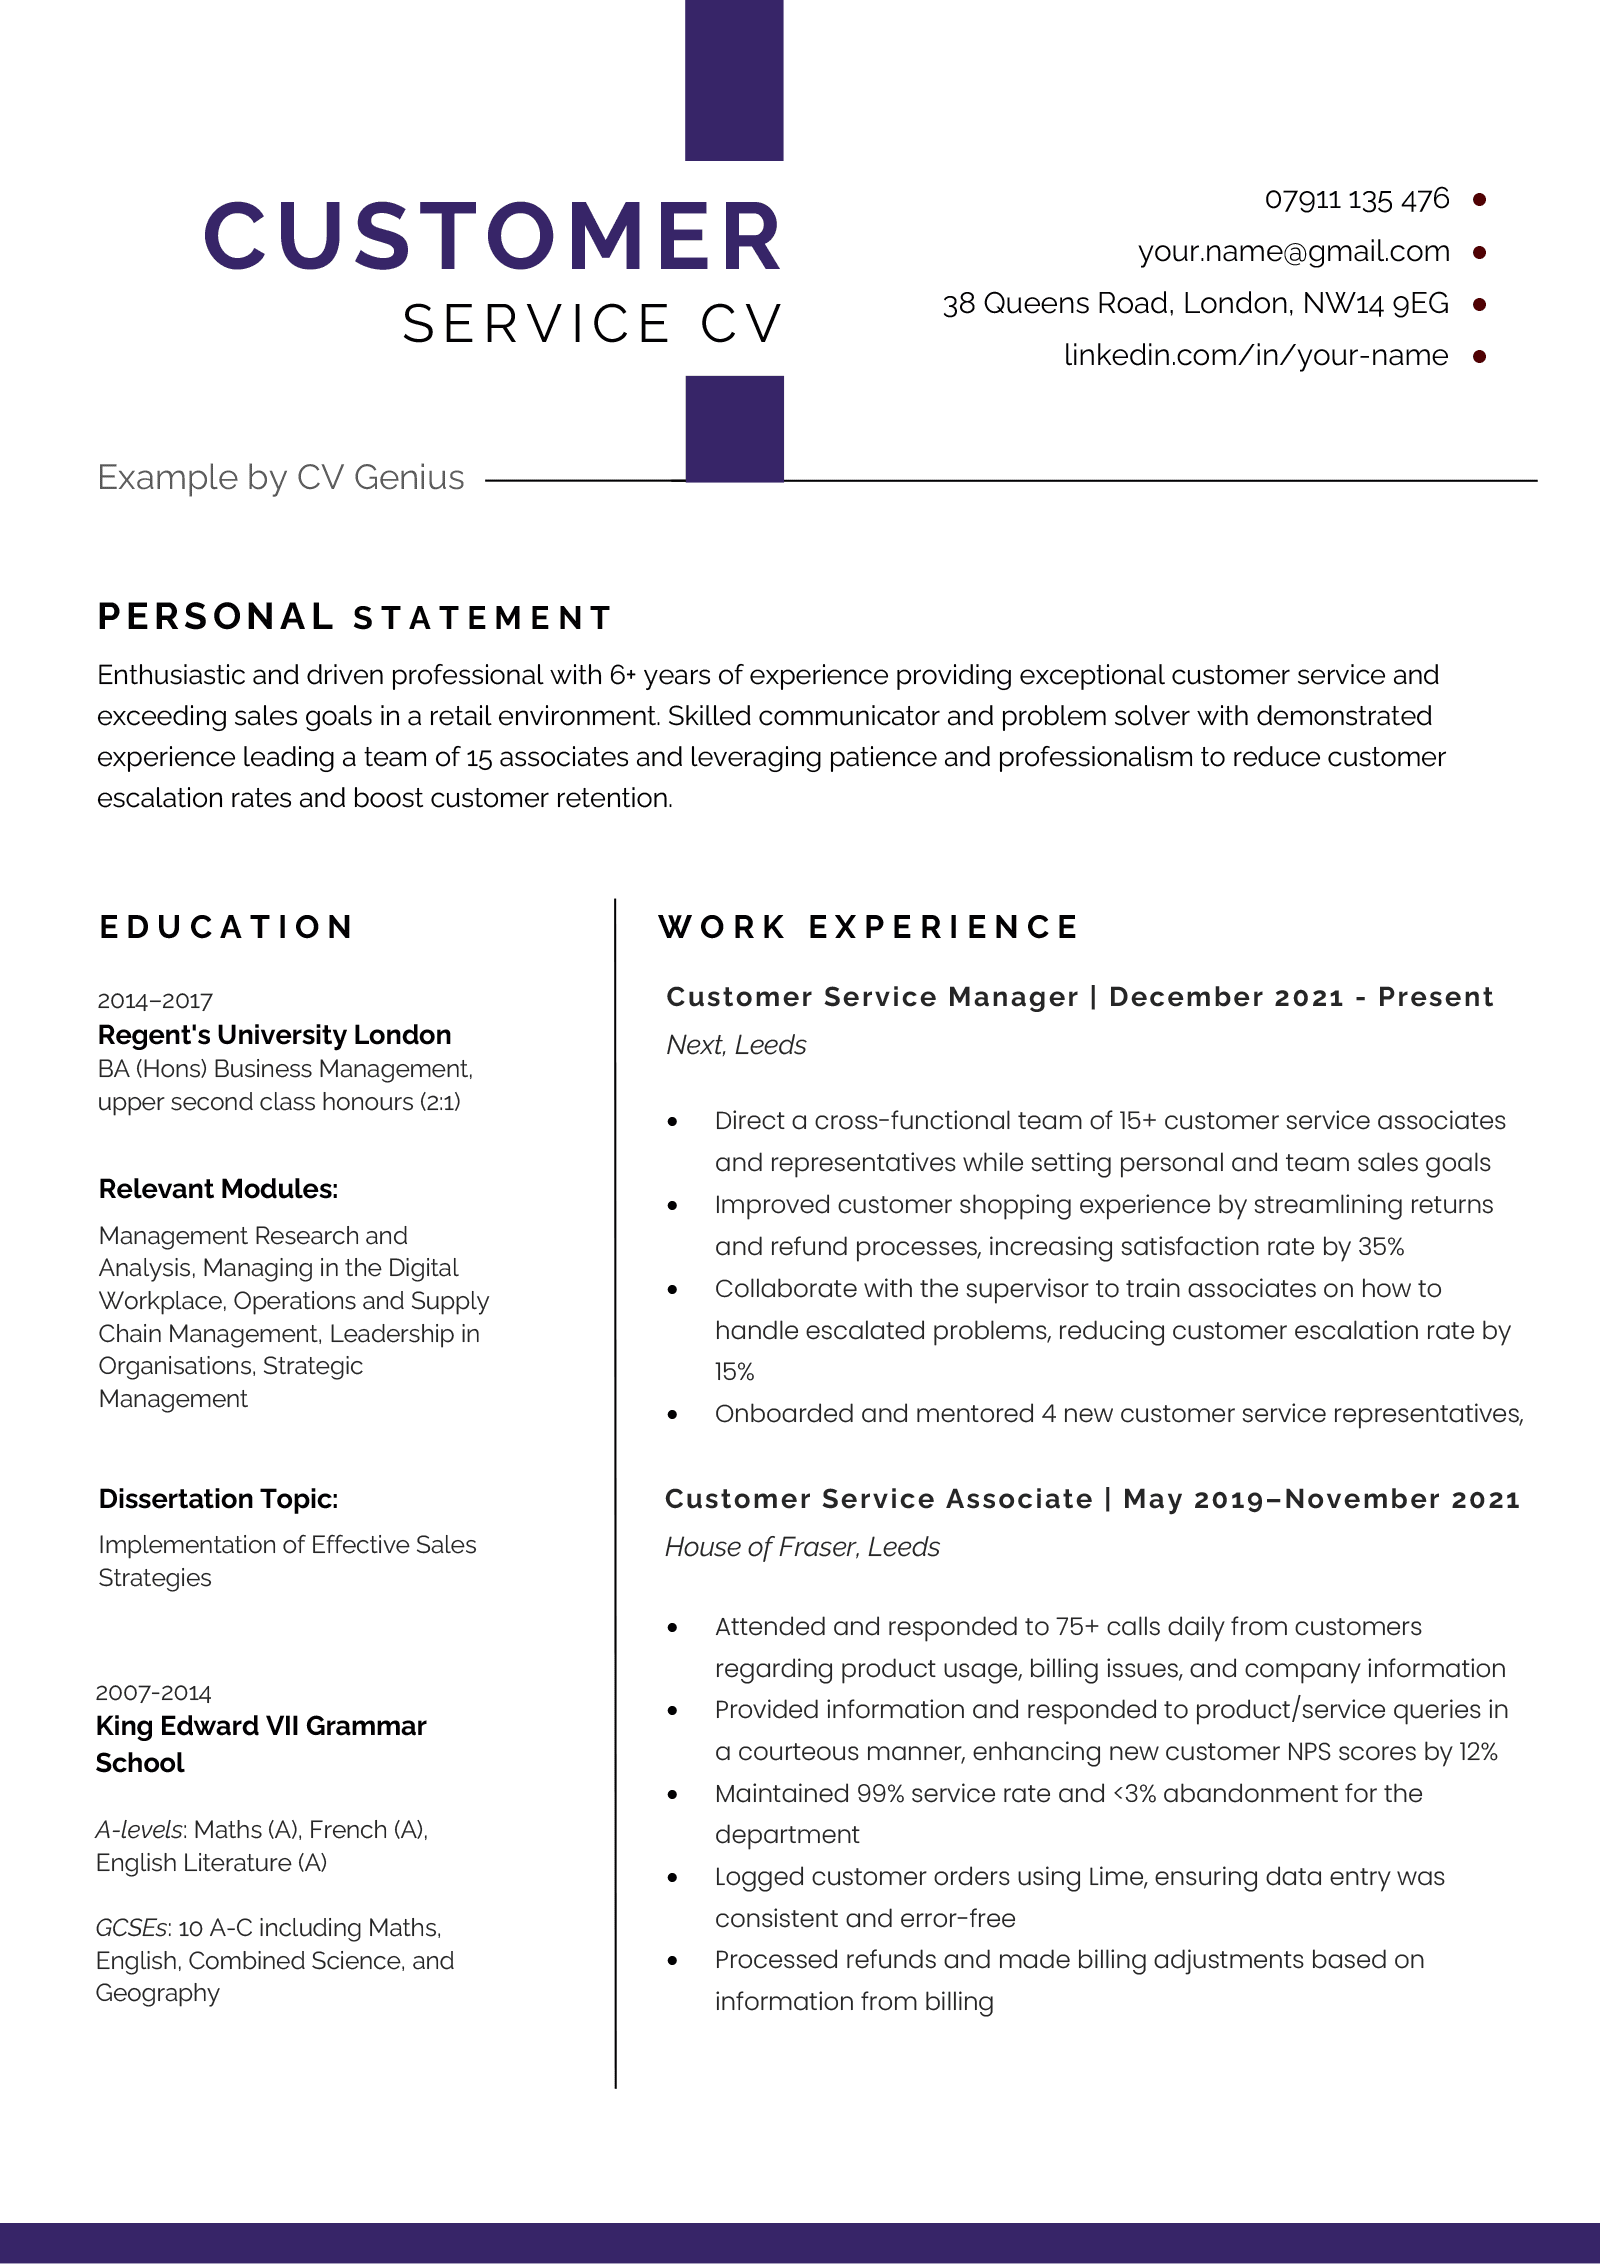 An example of the first page of a customer service CV.